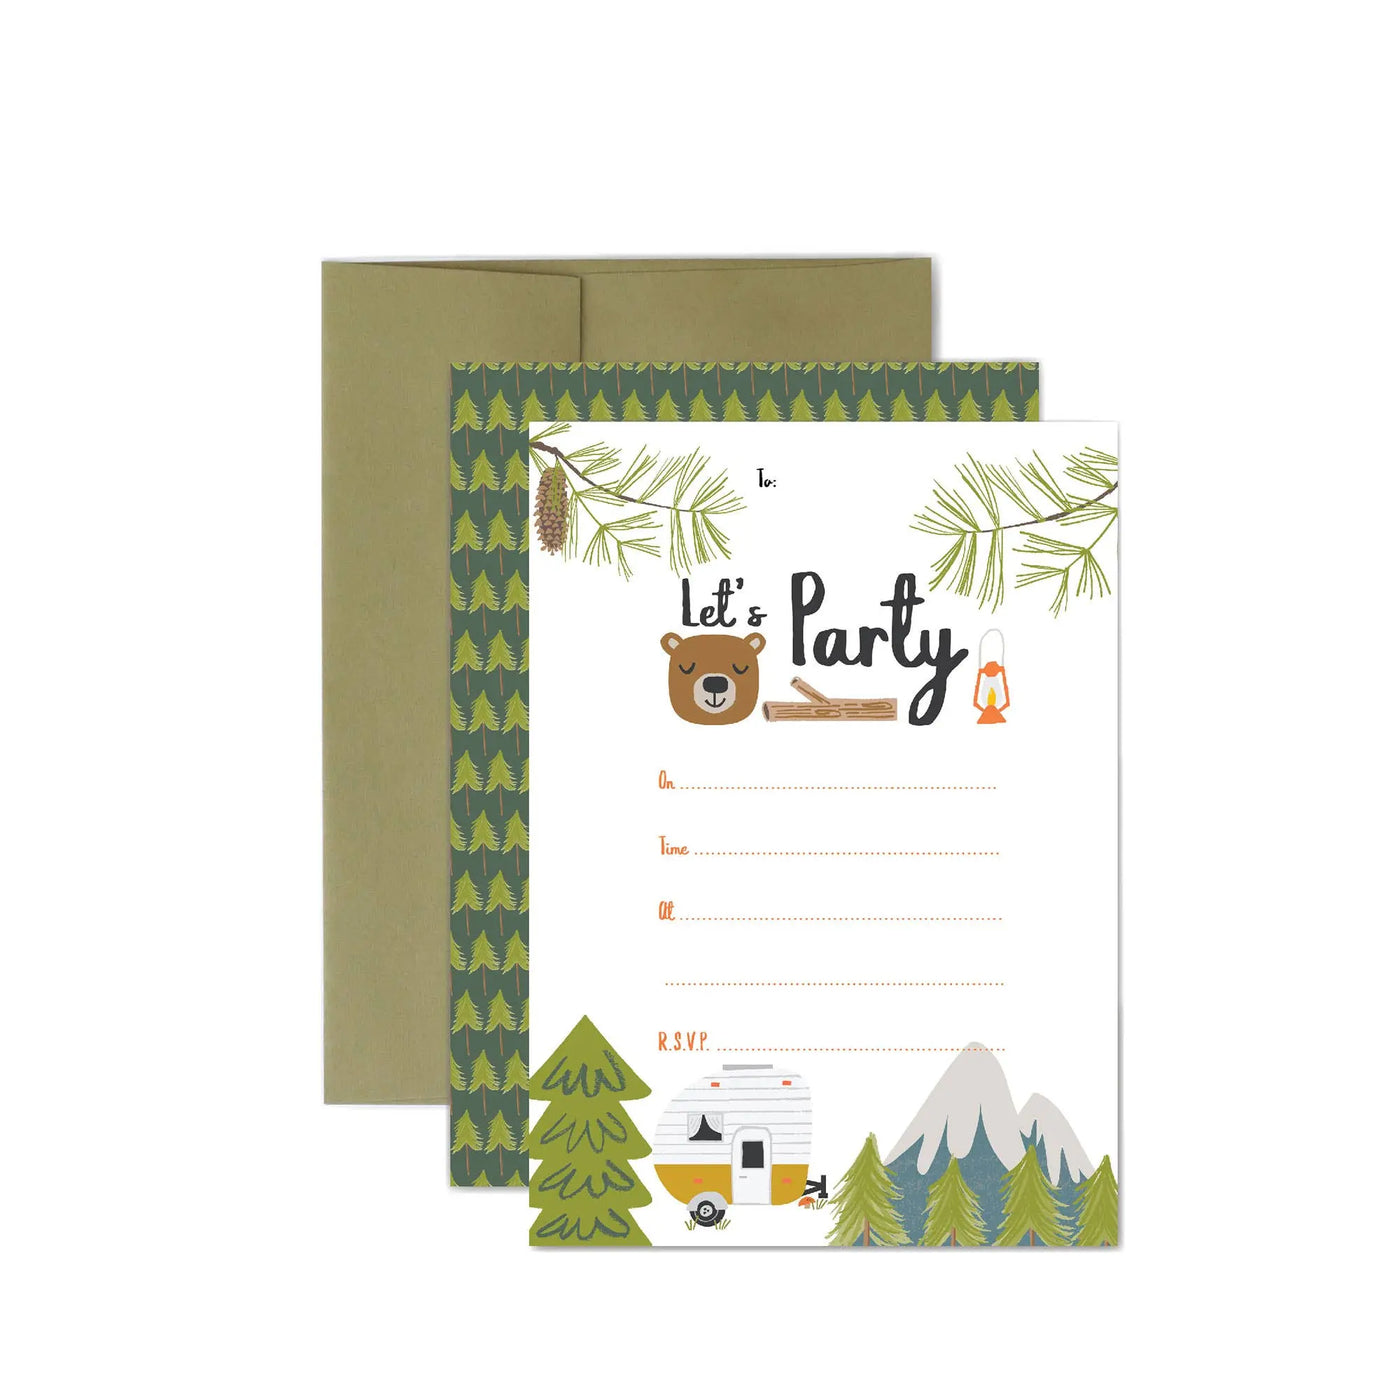 Little Camper - Party Invitations Lucy Darling